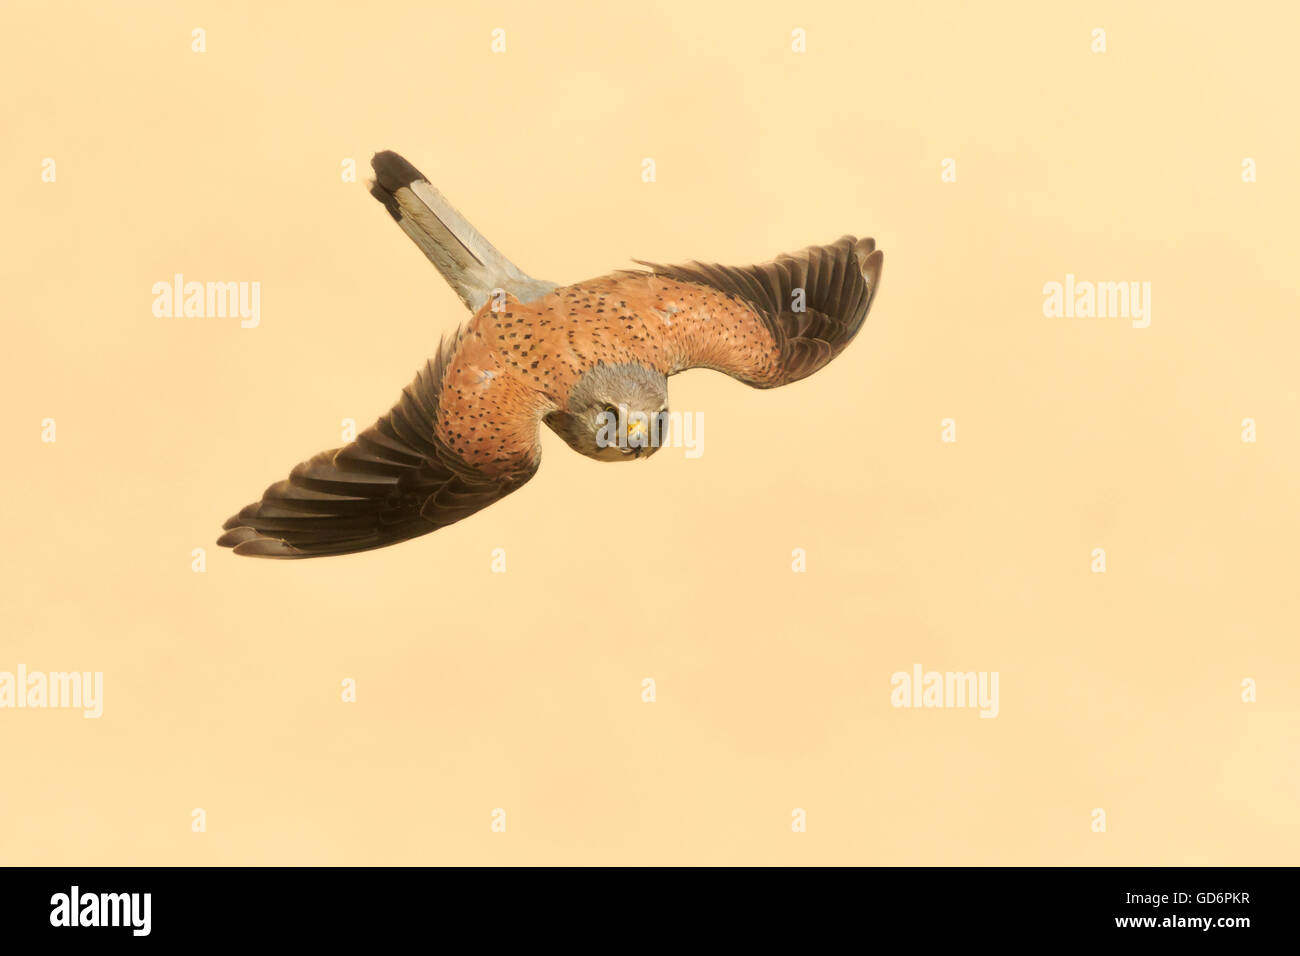 Male common kestrel Falco tinnunculus flying over the beach of Nazare, Portugal seen from above the bird of prey Stock Photo